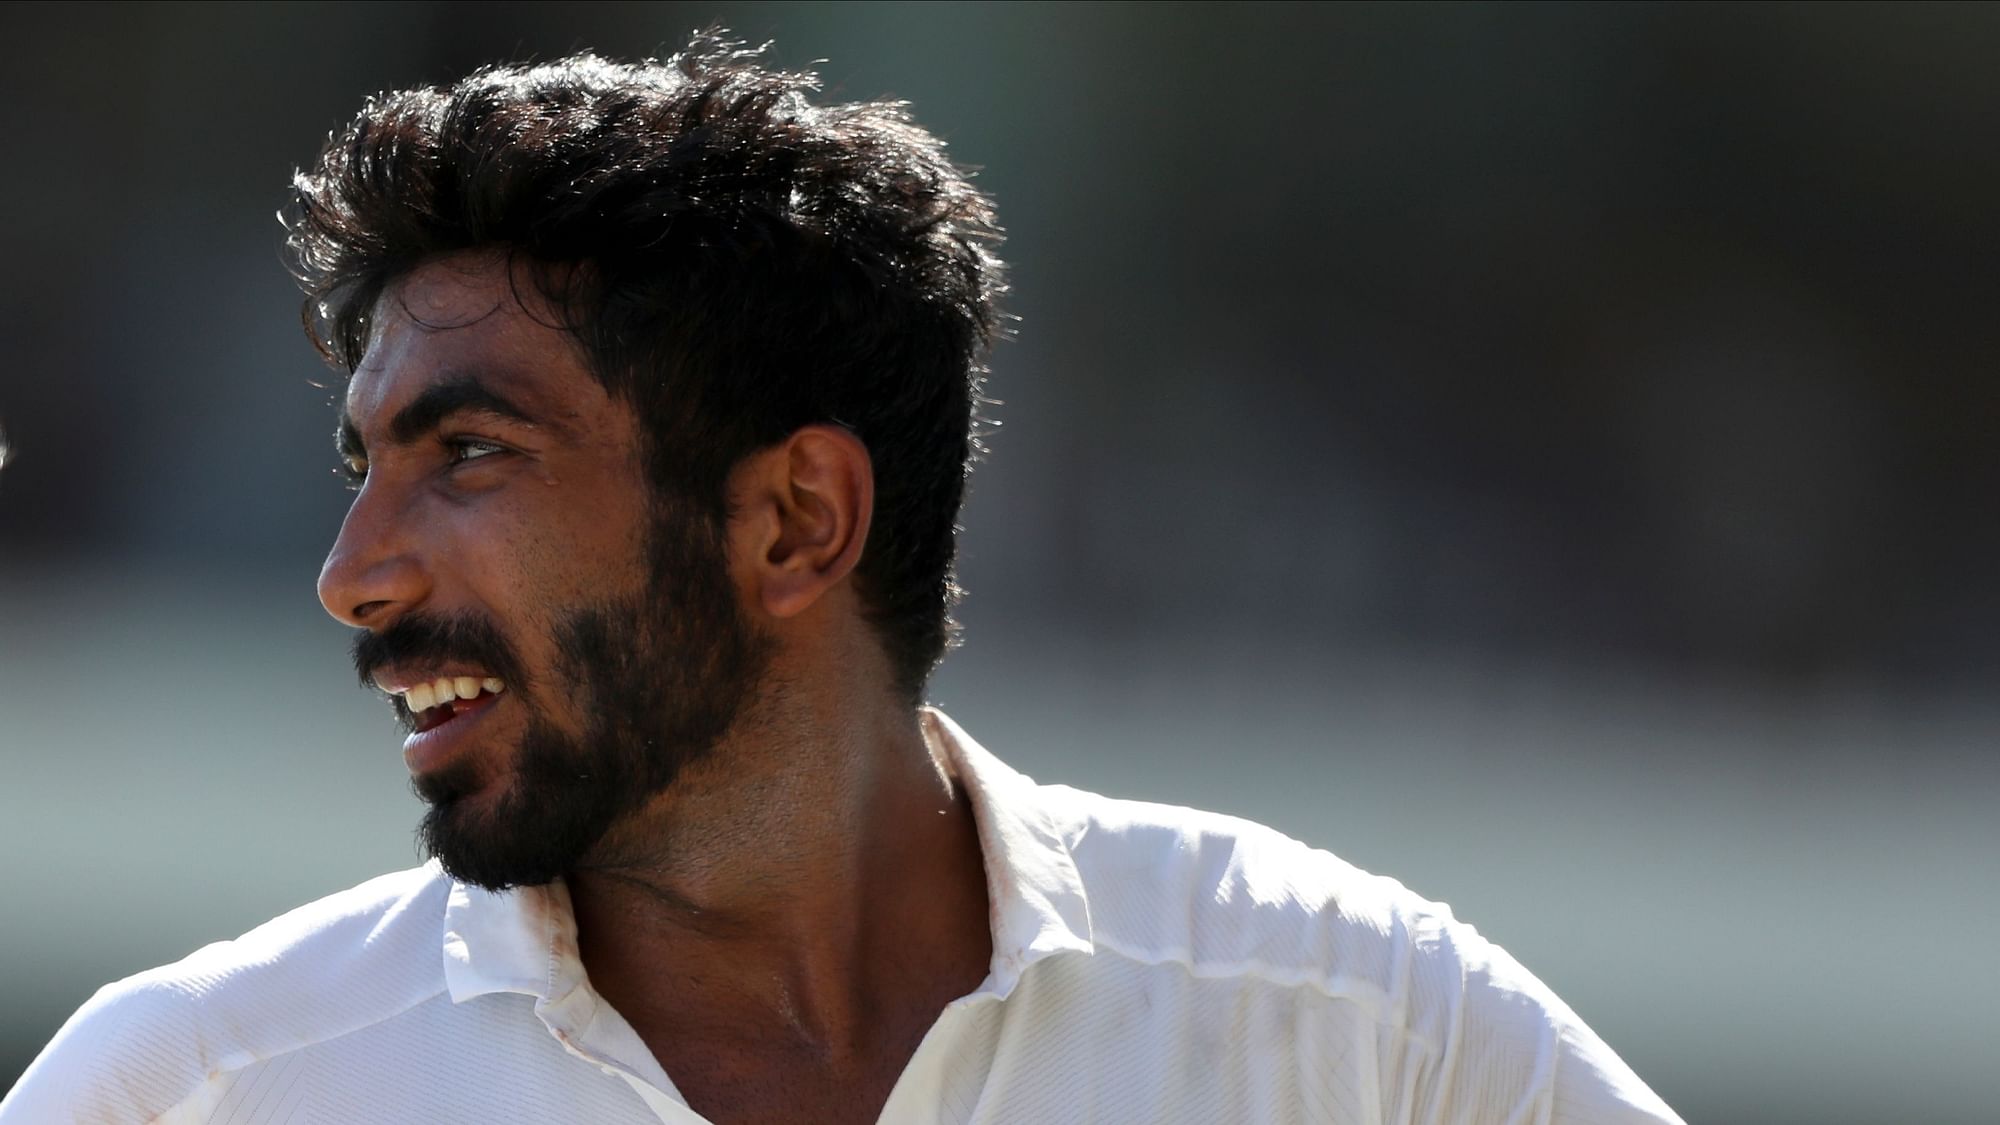 Jasprit Bumrah finished the day with 6/16 in 9.1 overs.